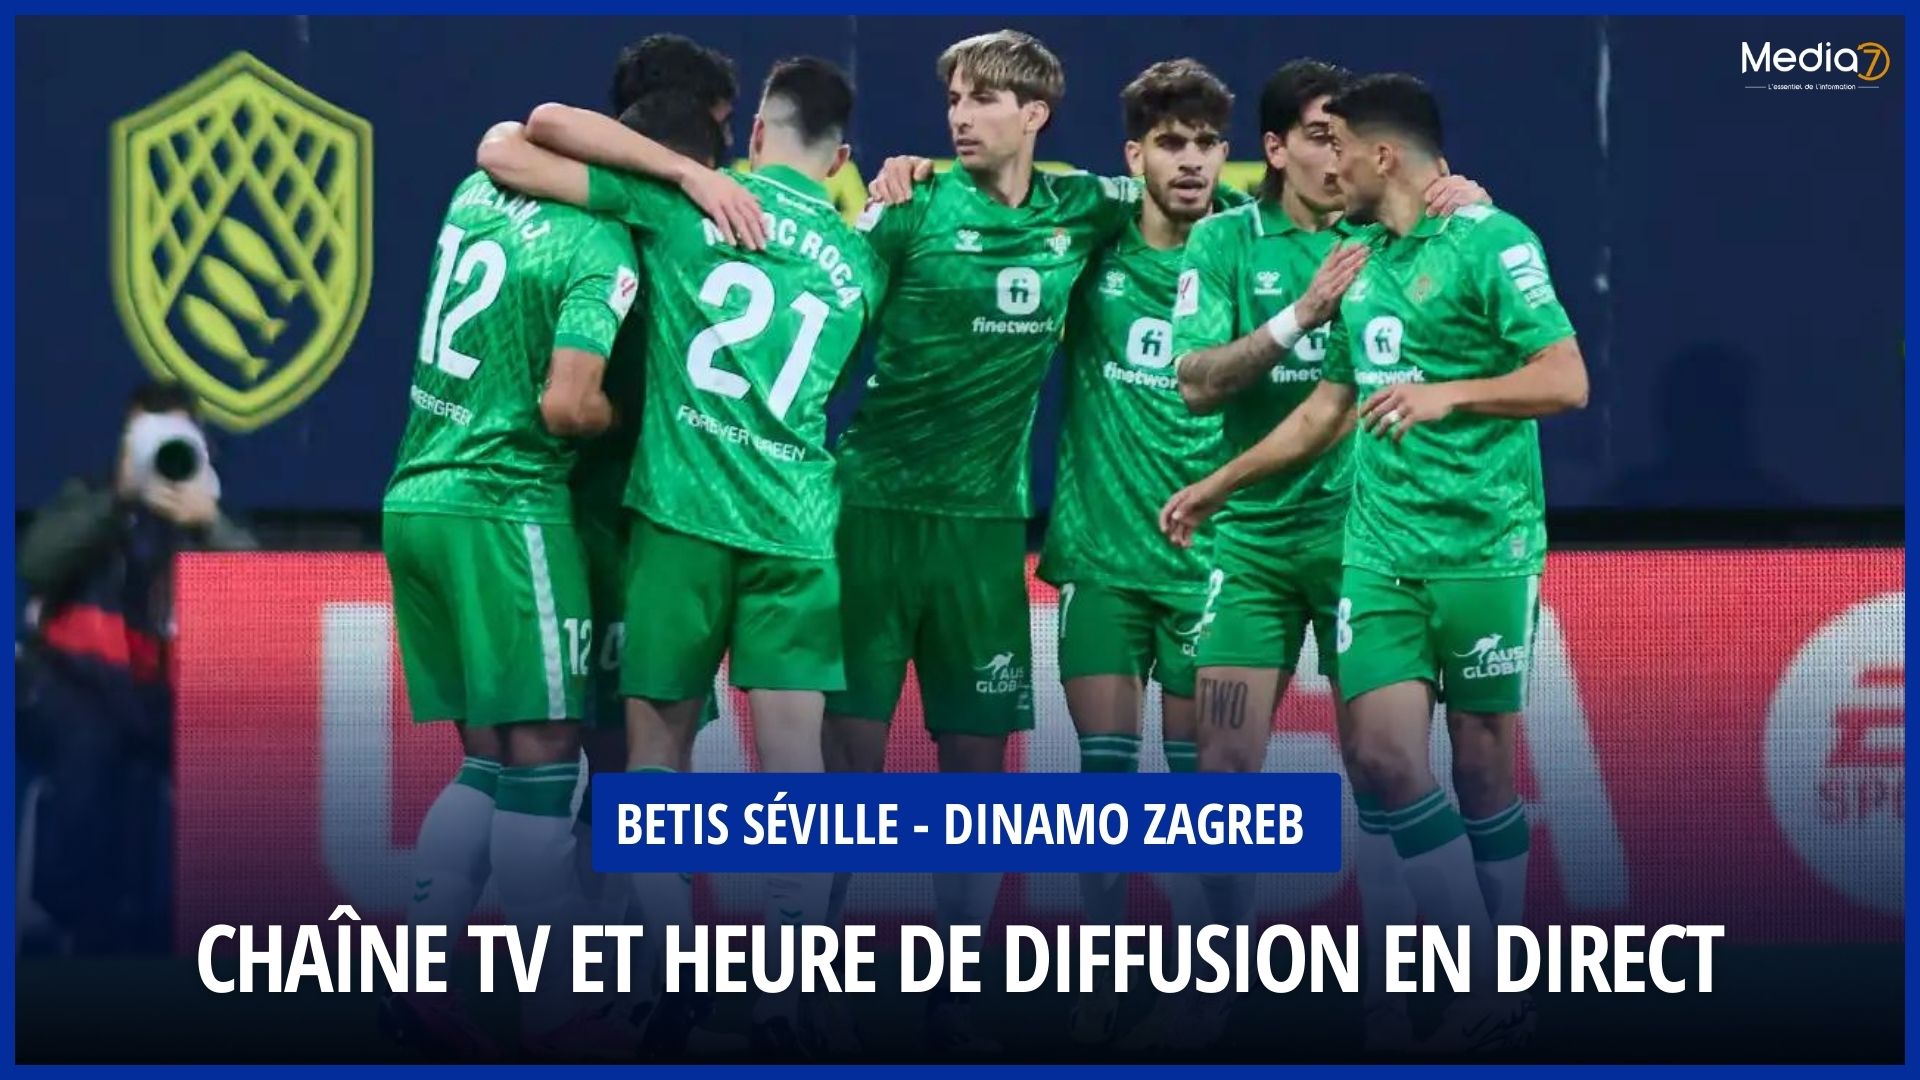 Follow the Betis Sevilla - Dinamo Zagreb Match Live: TV Channel and Broadcast Schedule - Media7